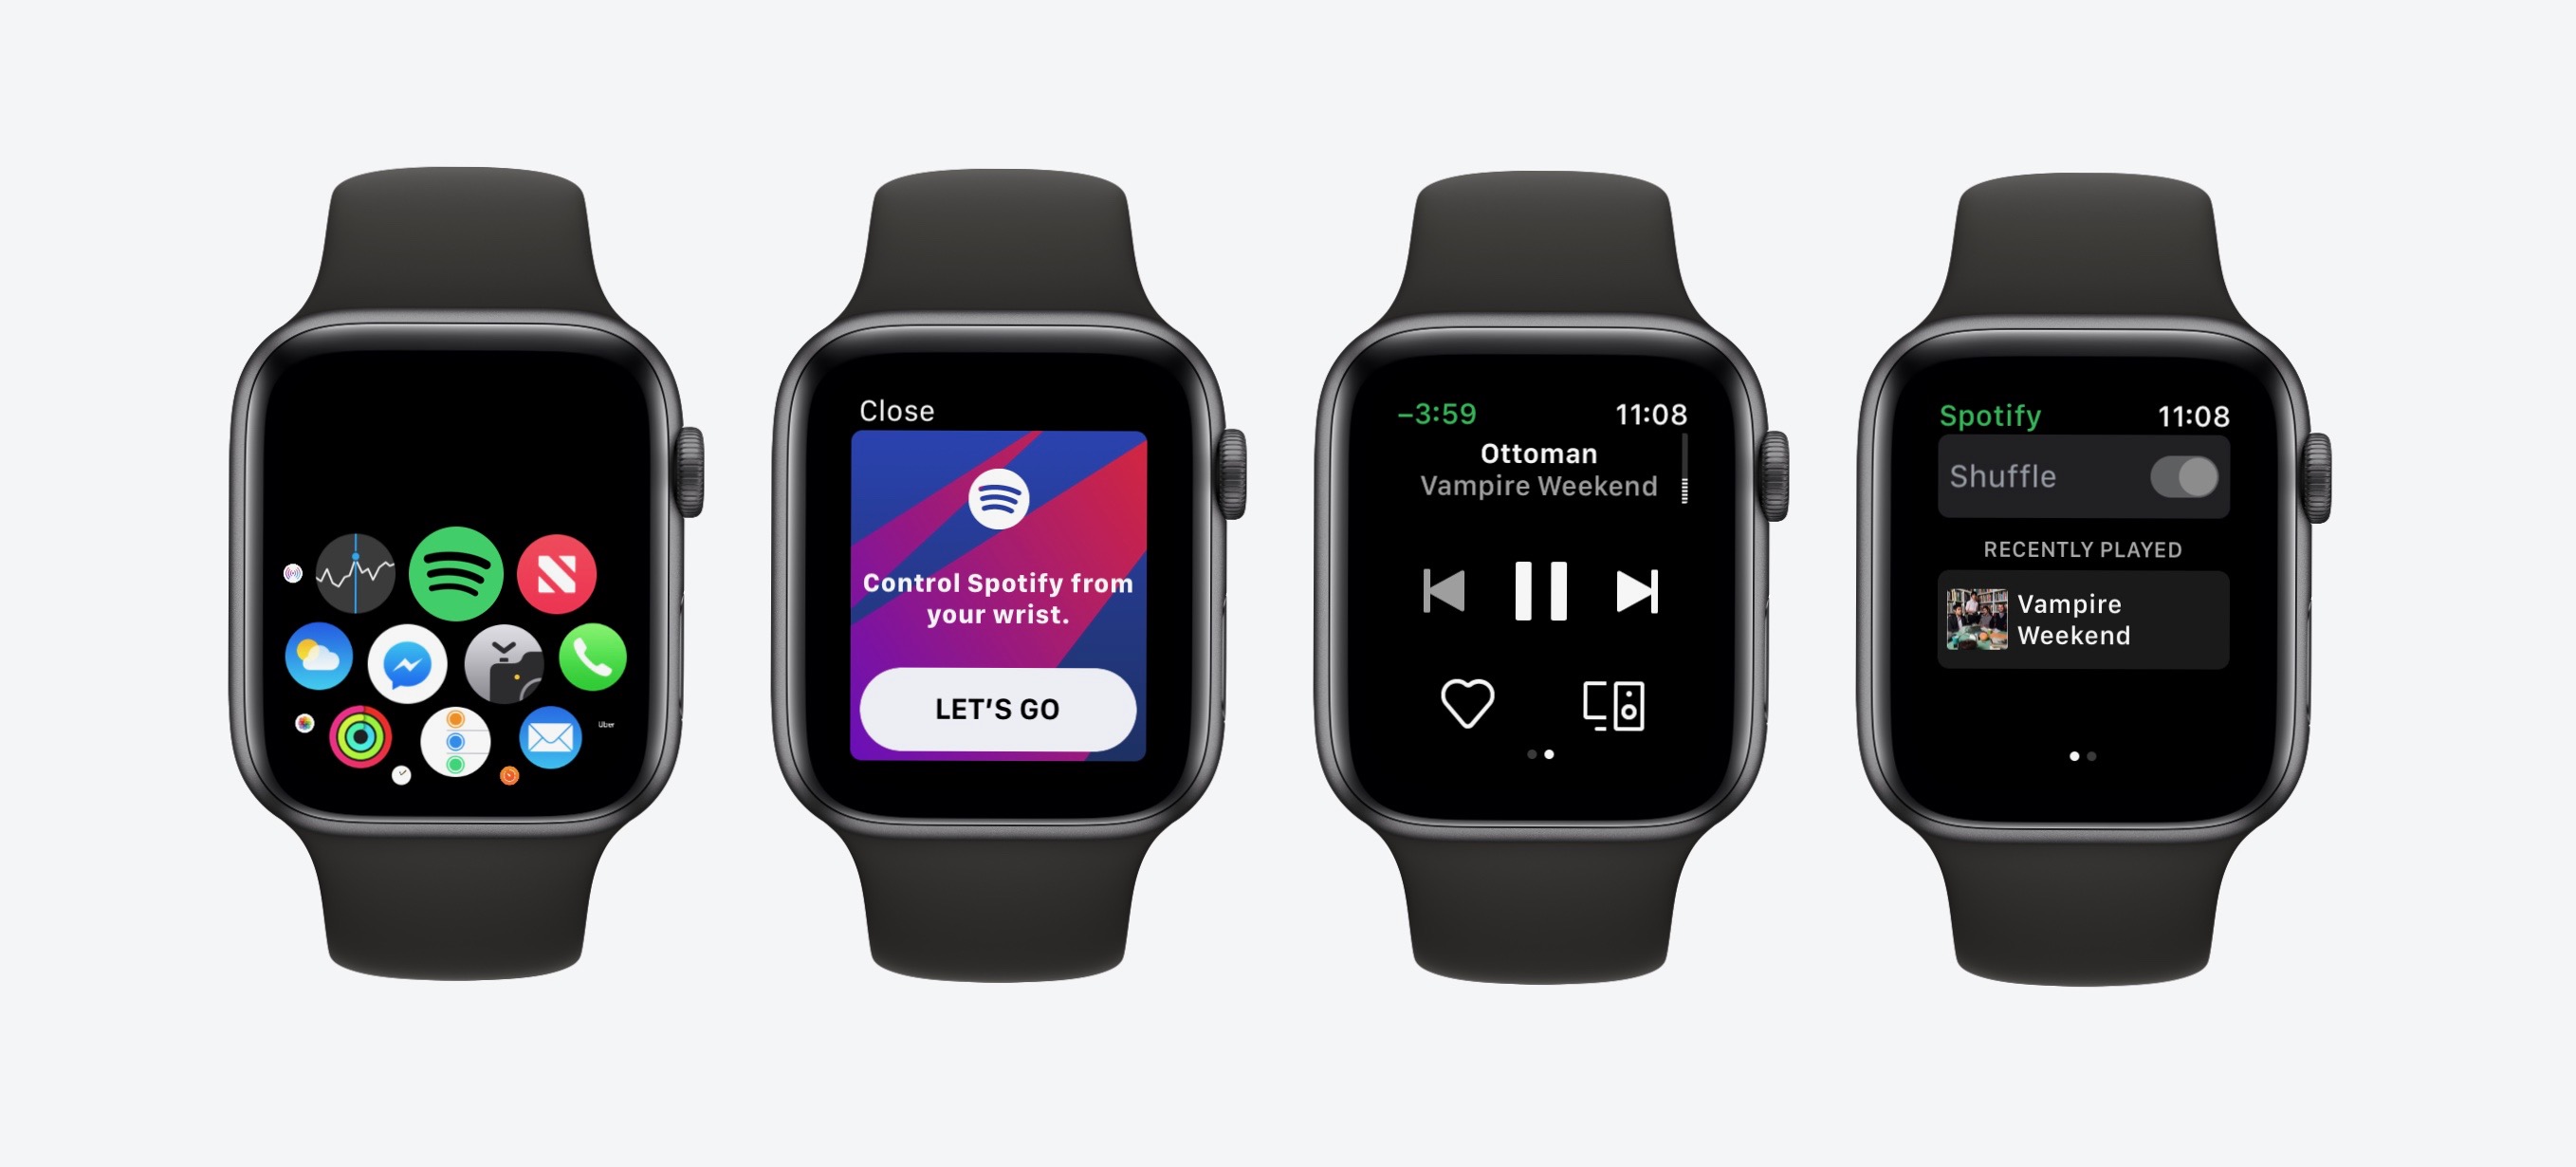 How to Download Spotify on Your Apple Watch? 11